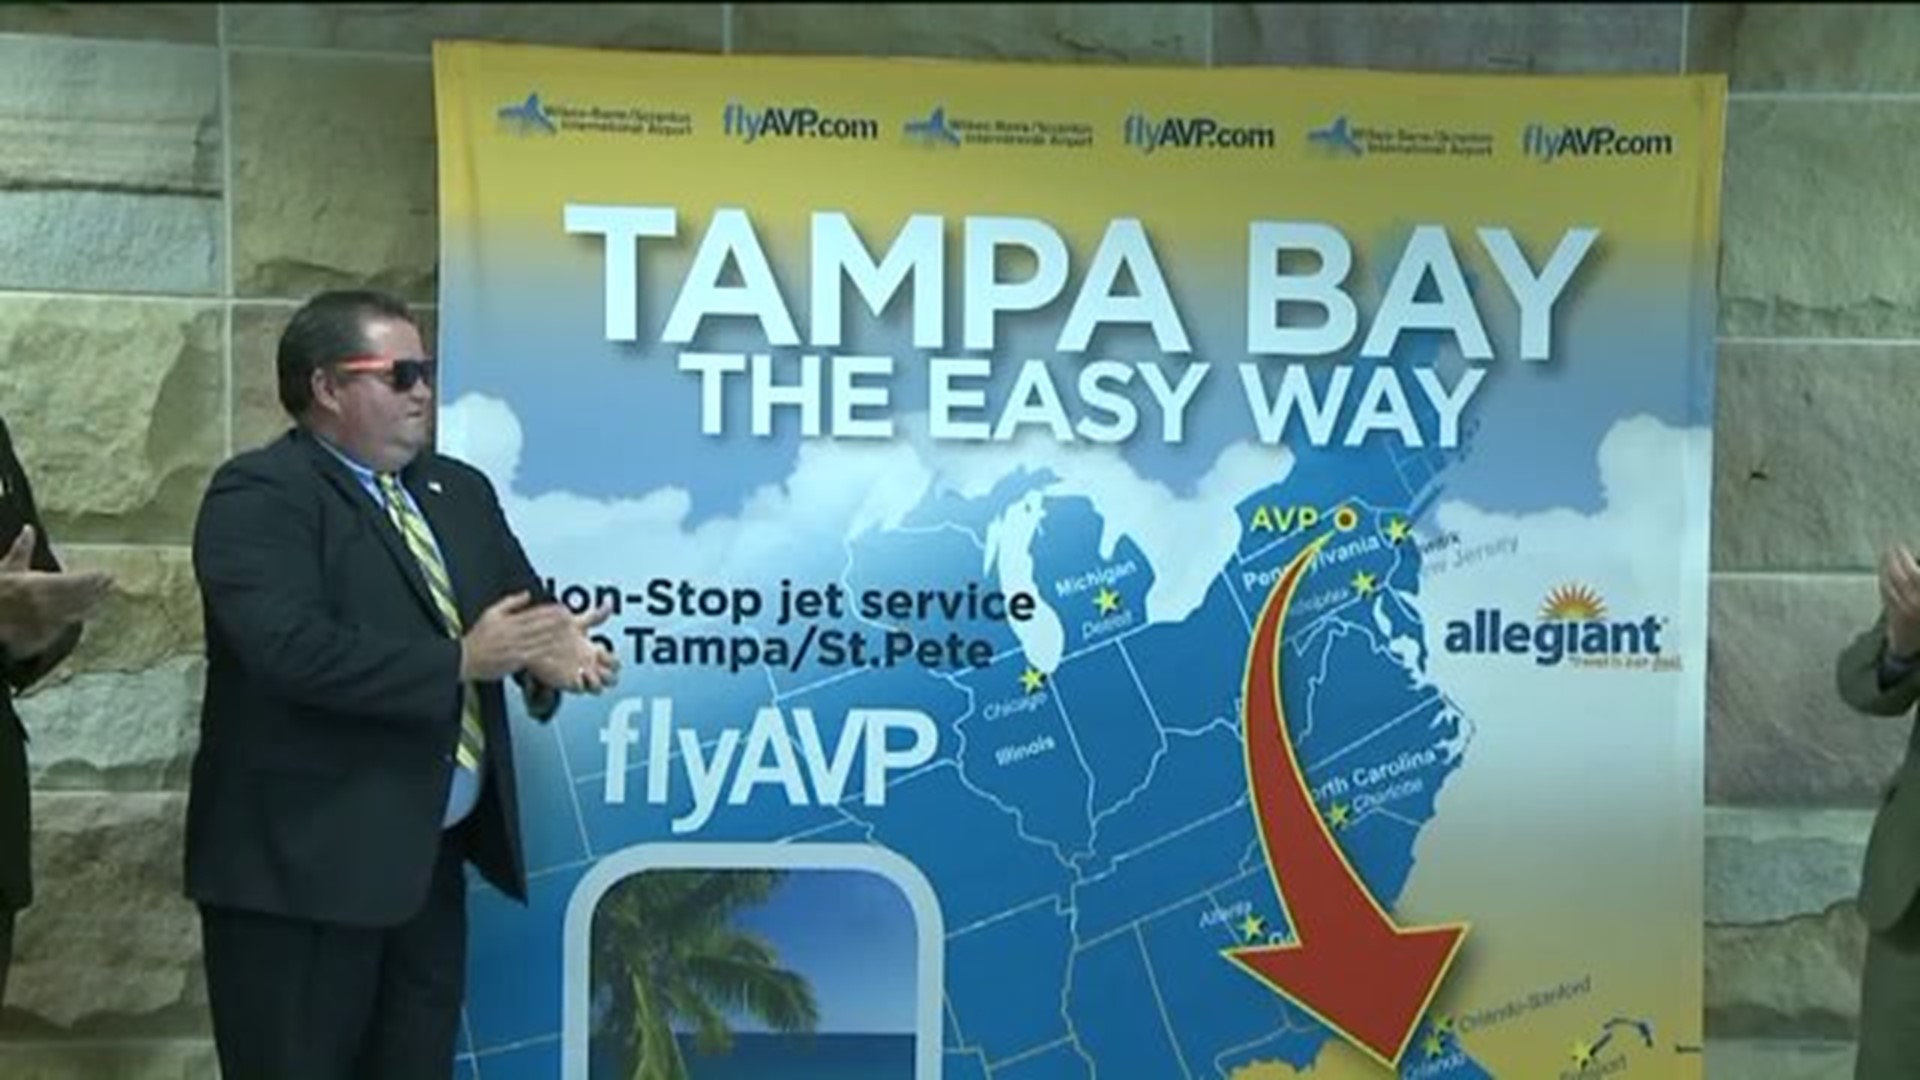 Direct Flights Listed from WB/Scr Airport to Tampa Bay Area